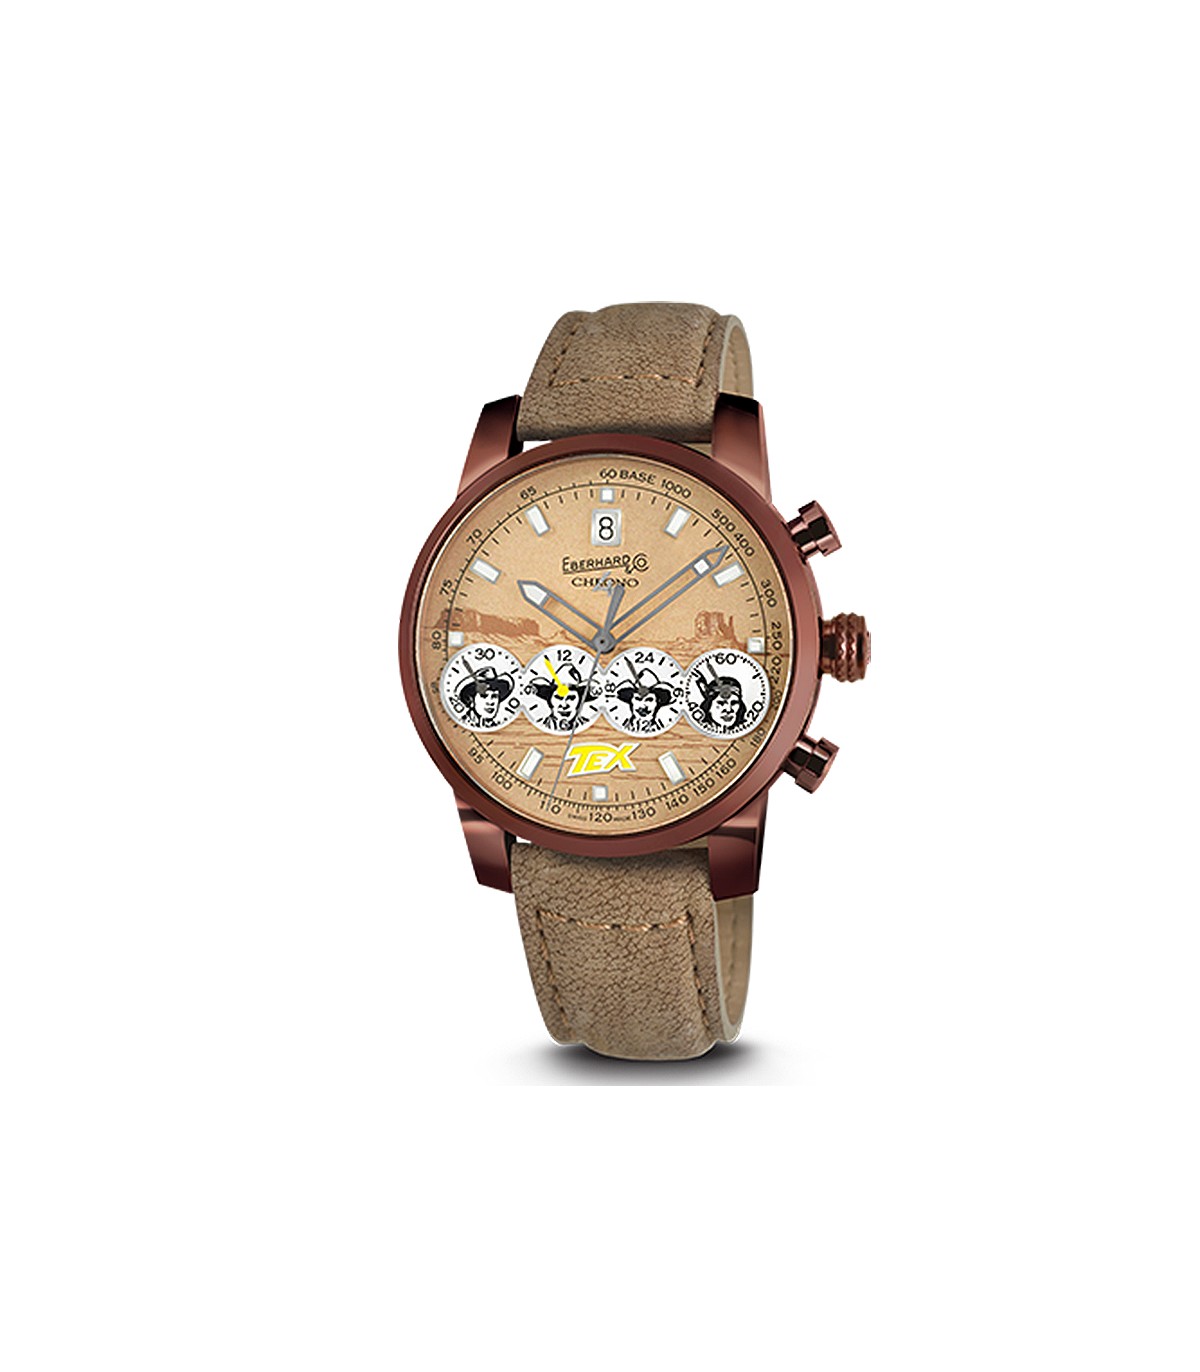 Eberhard & Co Chrono 4 Géant Bad Boy | Watch trends, Amazing watches, Cool  watches